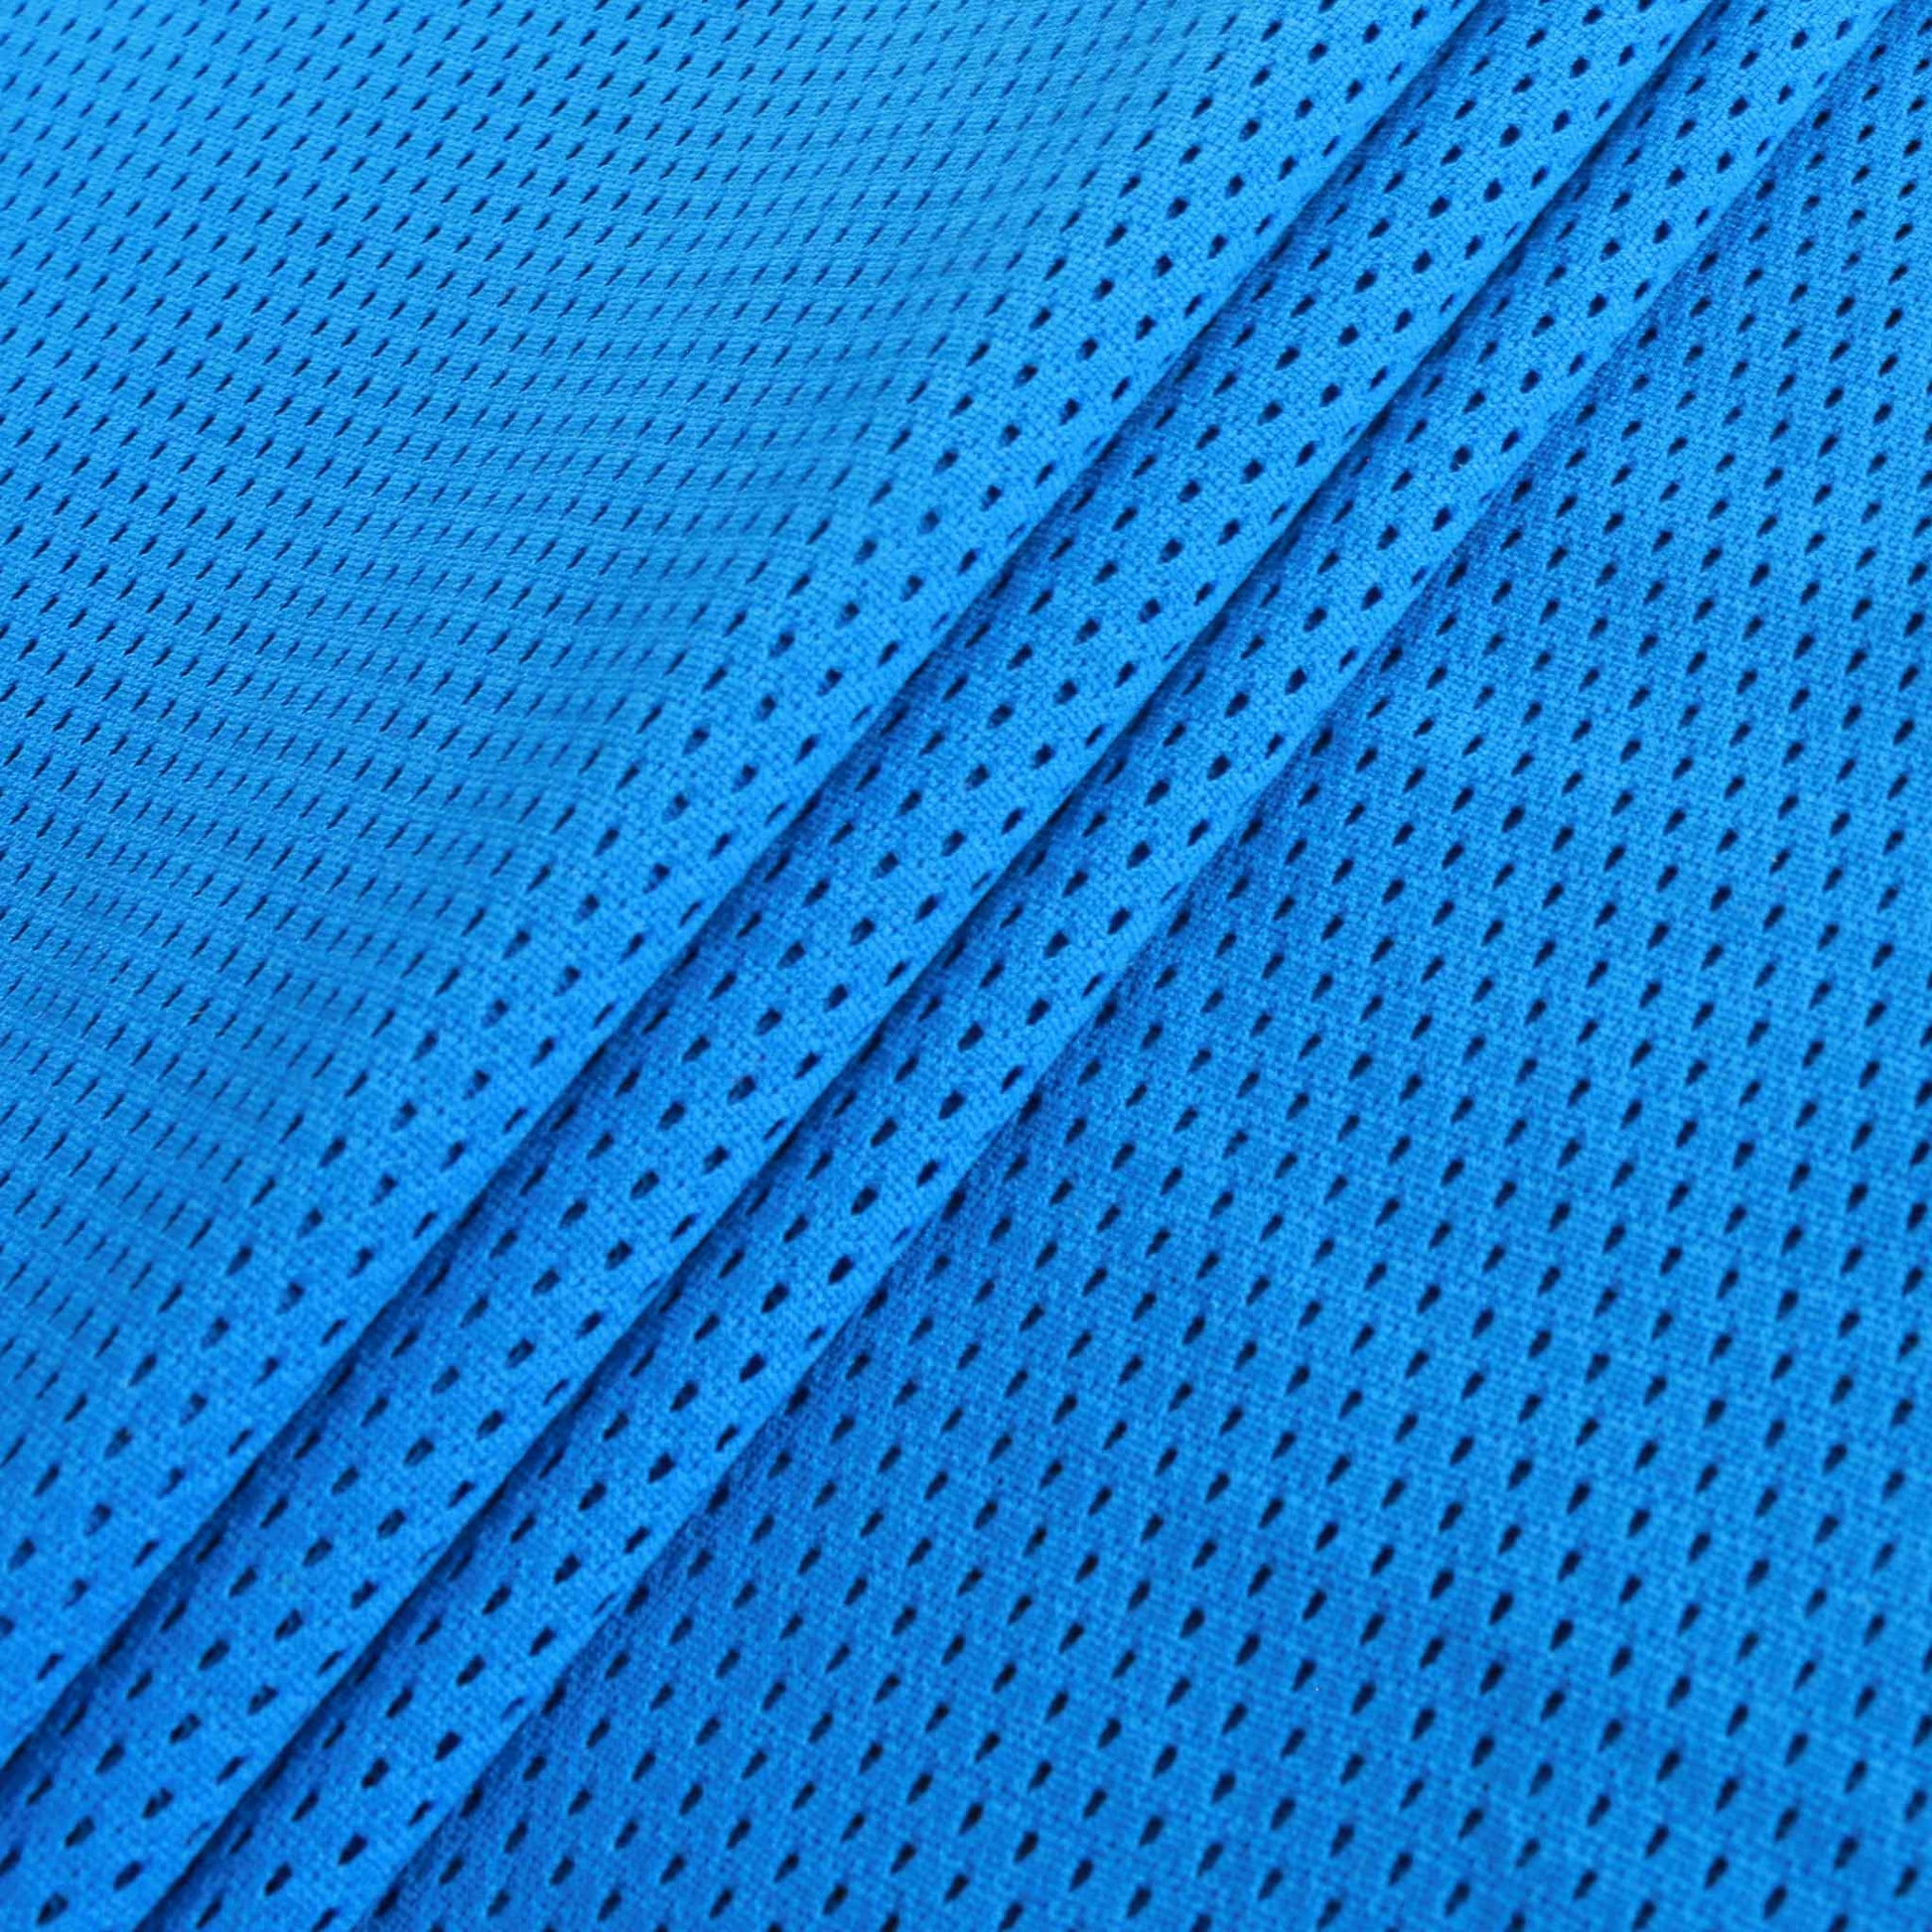 airtex mesh sport jersey fabric for dressmaking in blue